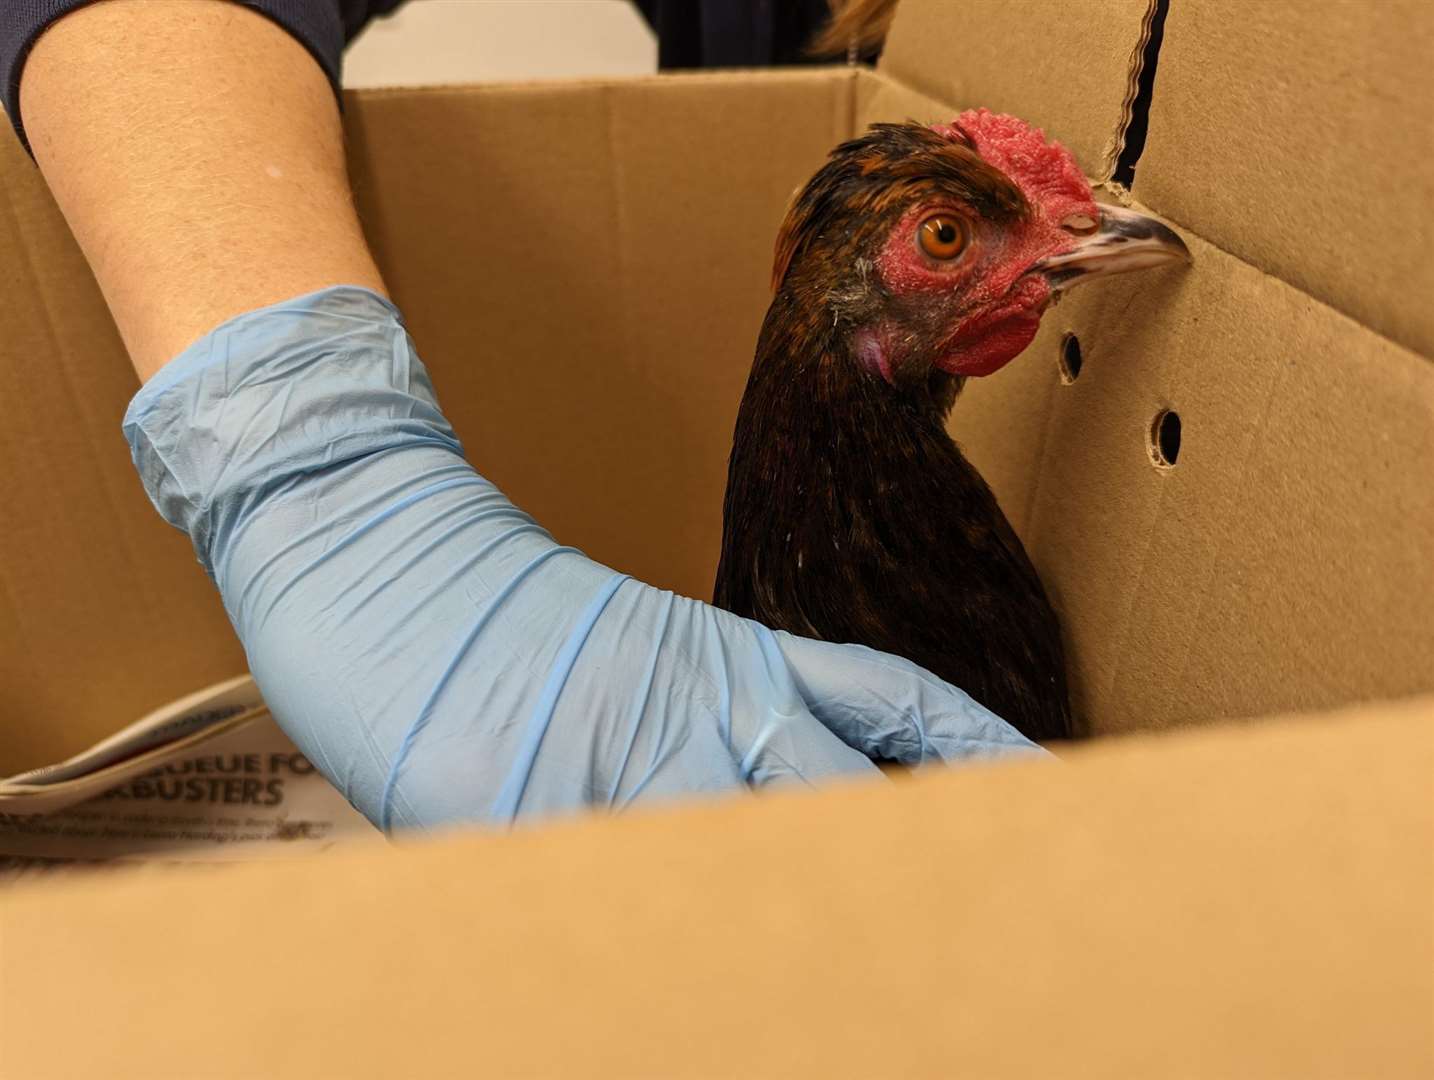 Two chickens were left abandoned in a box at Richborough Recycling Centre in Sandiwch. Photo: RSPCA